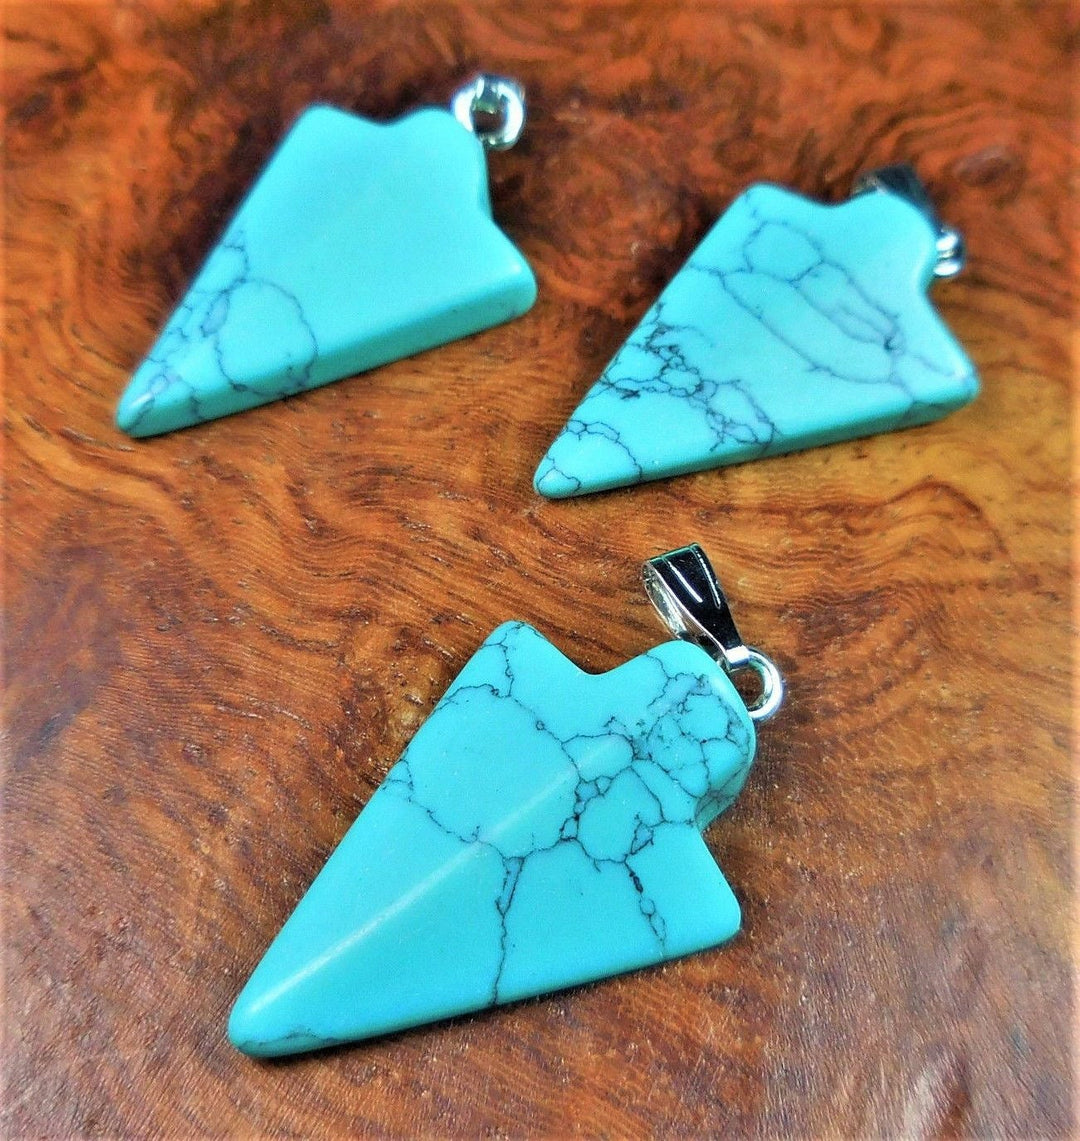 Arrowhead Necklace - Petite Turquoise Howlite Pendant - Carved Arrow Charm Stone Earrings (A19) Healing Crystals and Stones Jewelry